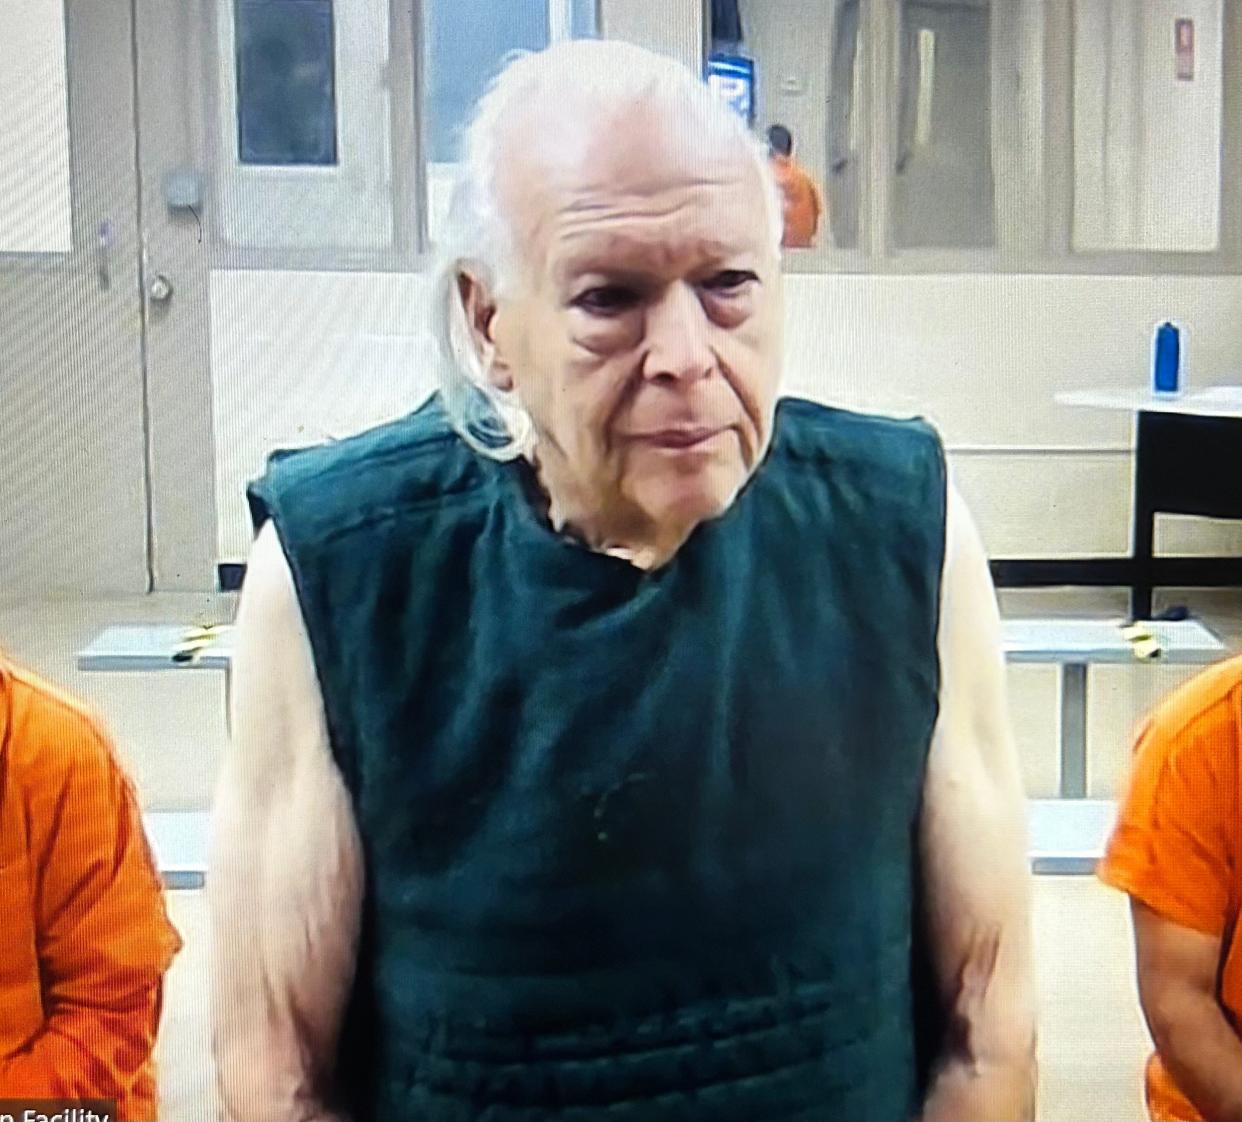 Charles Kidd Jr., 85, was ordered held without bond during his first appearance Tuesday on a charge of second-degree murder.